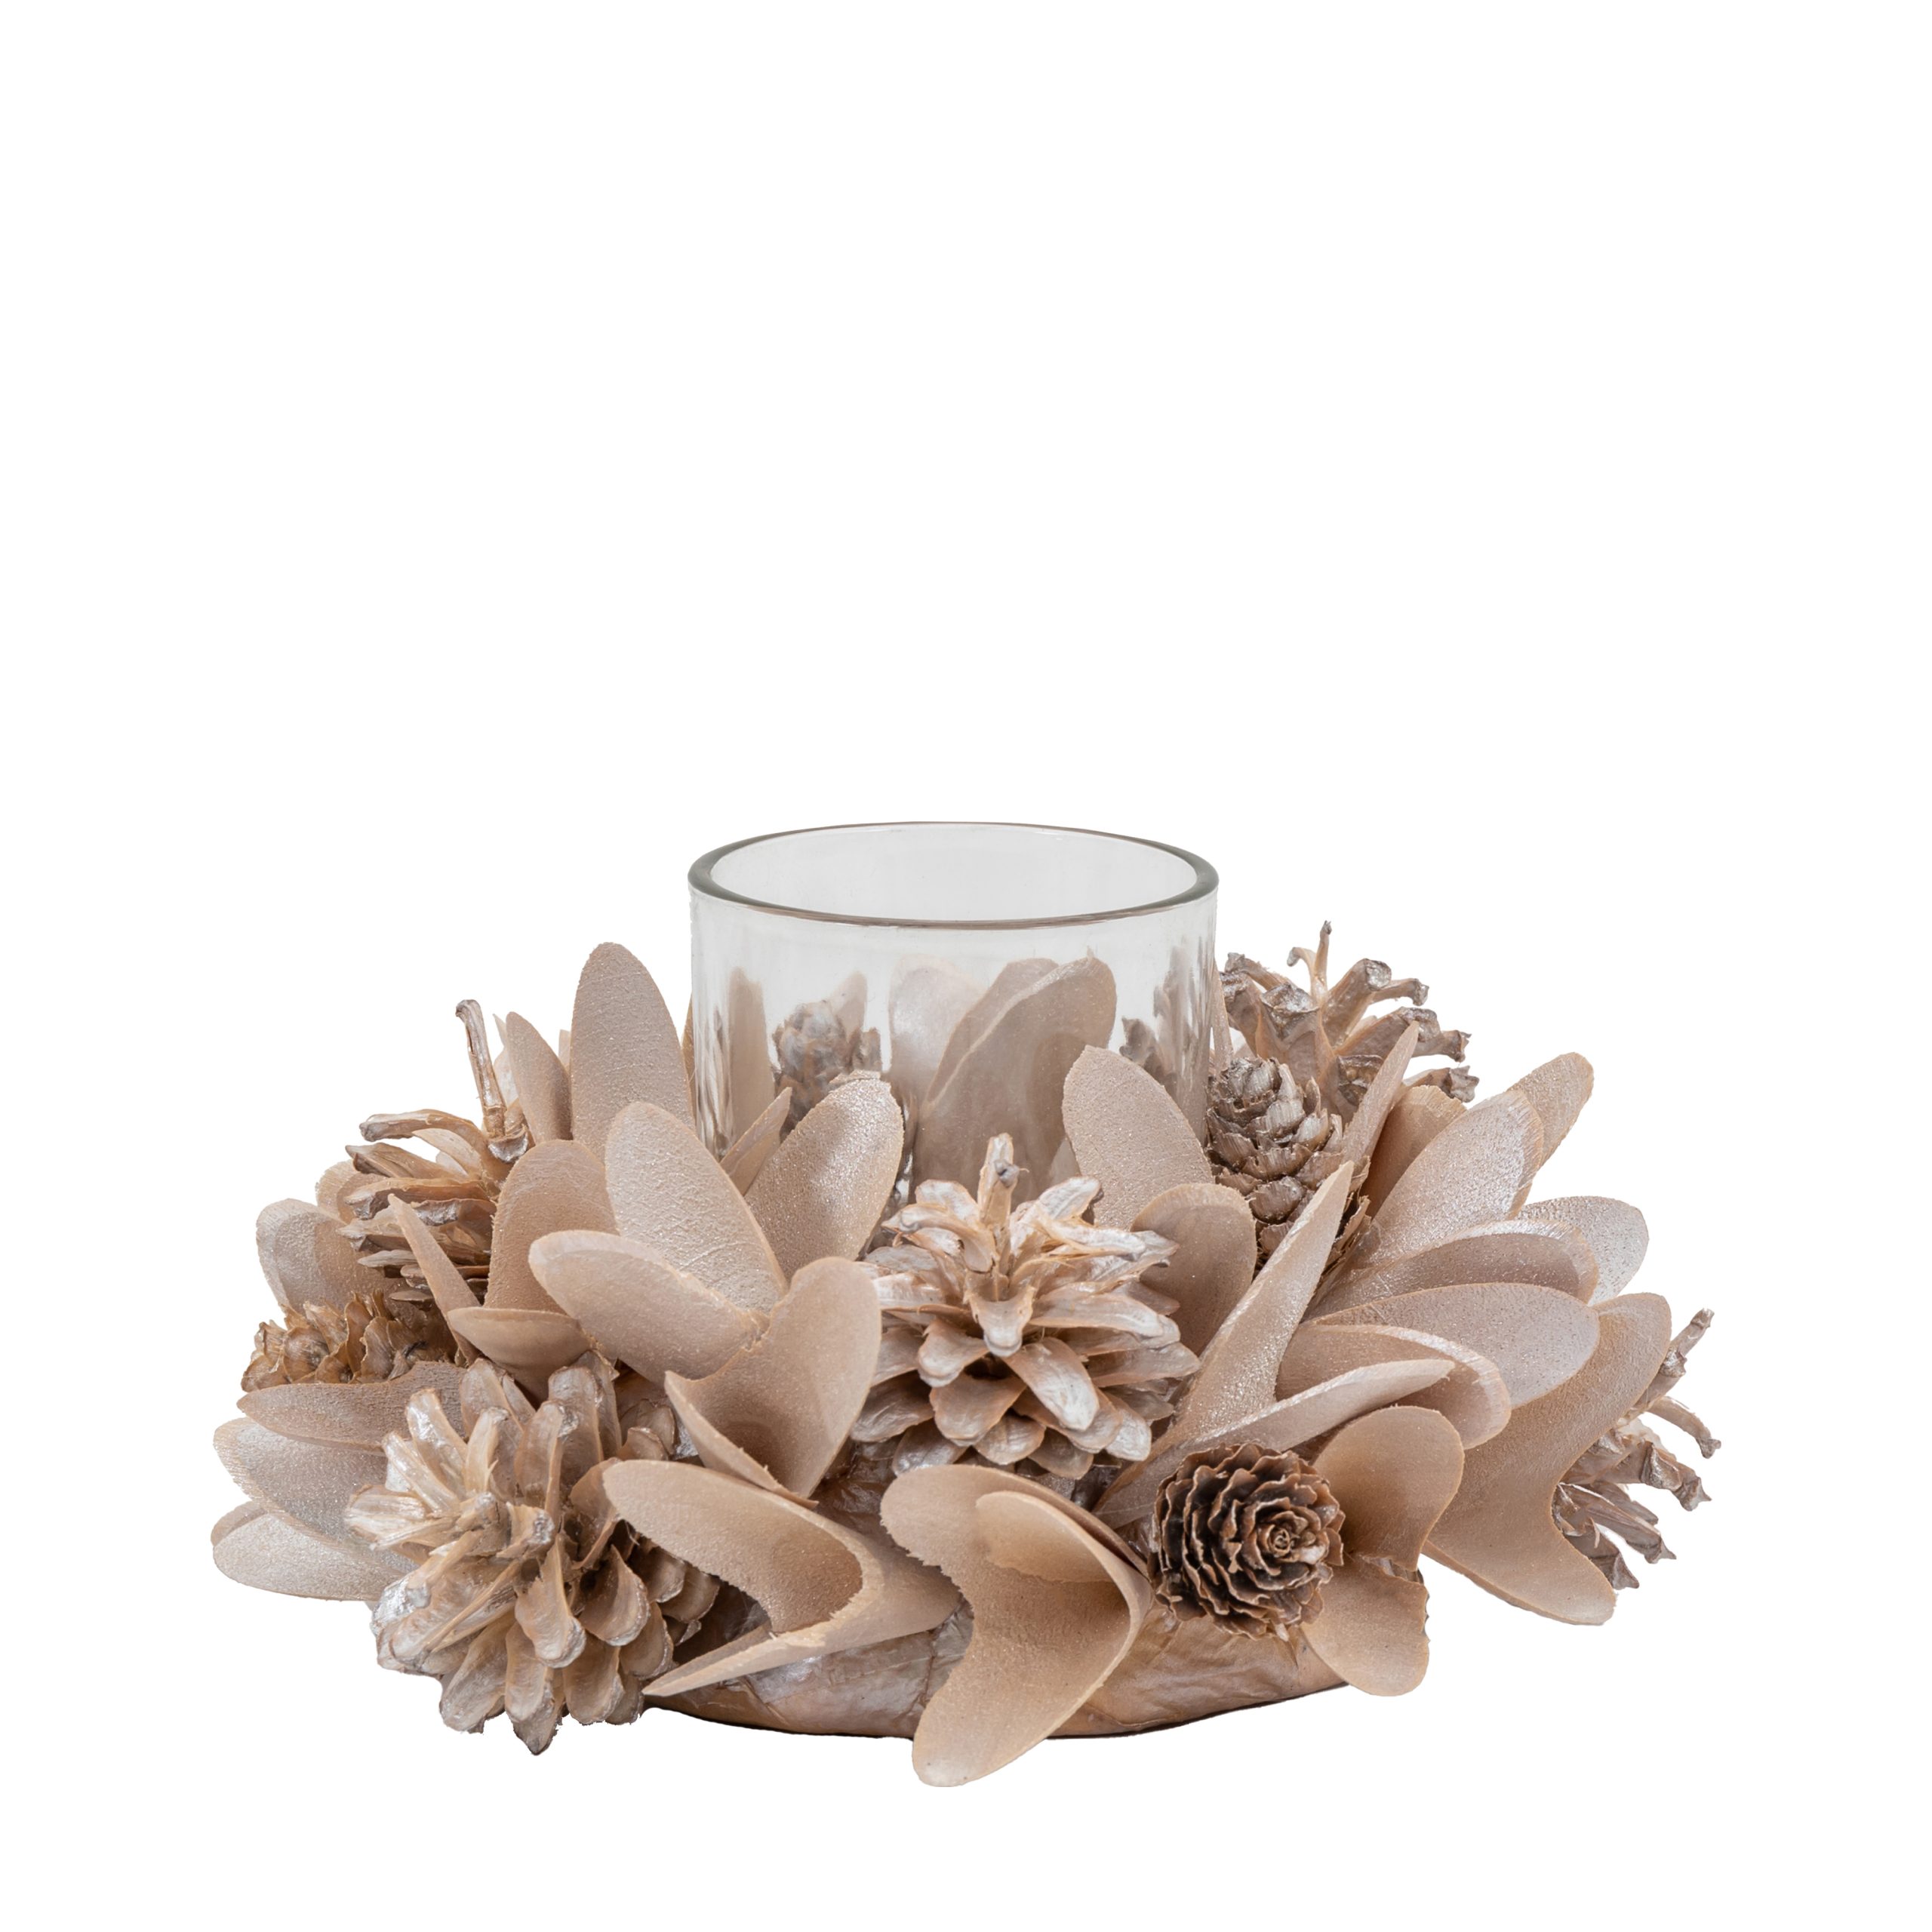 Gallery Direct Blush Cone & Floral Tealight Holder